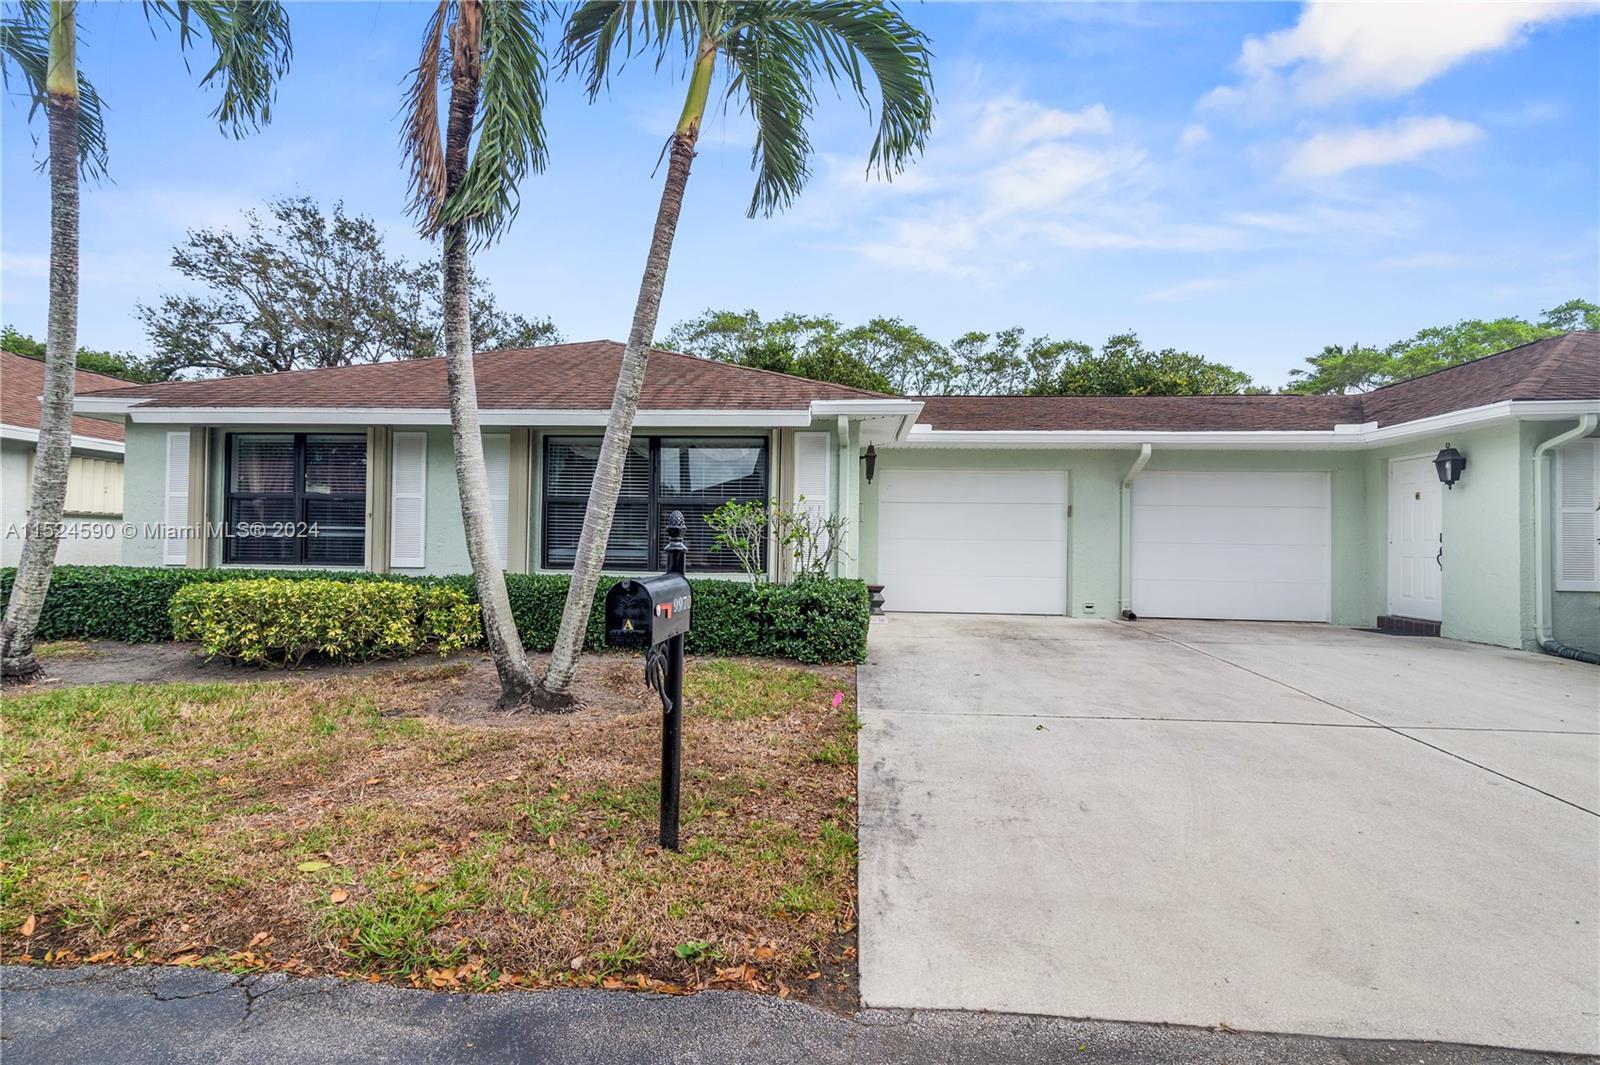 This updated 2-bedroom + 2-bath villa with a generous 1-car garage is the perfect Florida home. The 